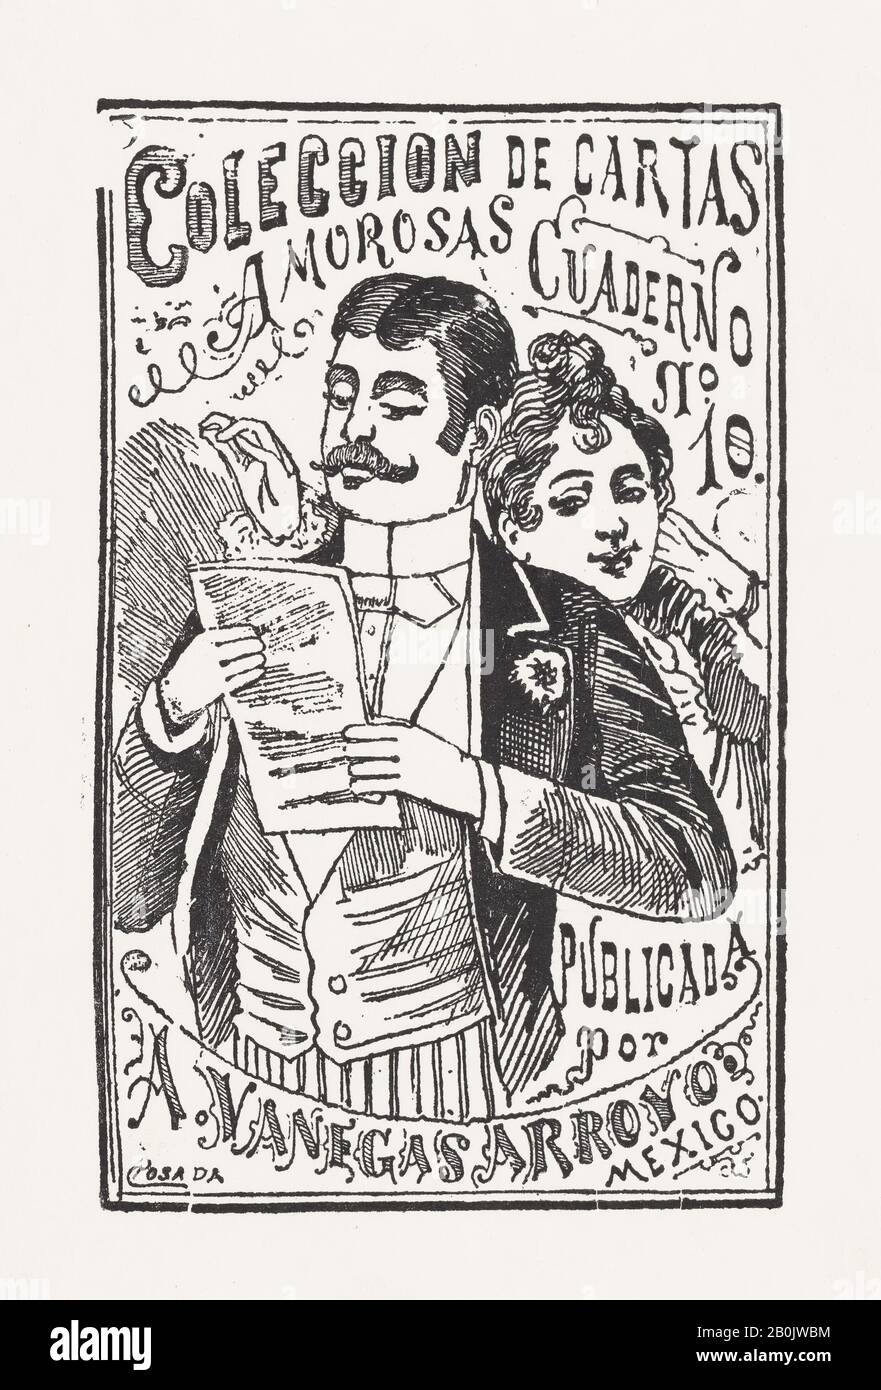 José Guadalupe Posada, A woman looking over a man's shoulder at the letter in his hand, illustration for 'Coleccion de Cartas Amorosas Cuaderno No. 10,' published by Antonio Vanegas Arroyo, José Guadalupe Posada (Mexican, 1851–1913), ca. 1880–1910, Wood engraving, Sheet: 6 1/2 × 4 1/16 in. (16.5 × 10.3 cm), Image: 5 1/2 × 3 3/8 in. (14 × 8.5 cm), Prints Stock Photo